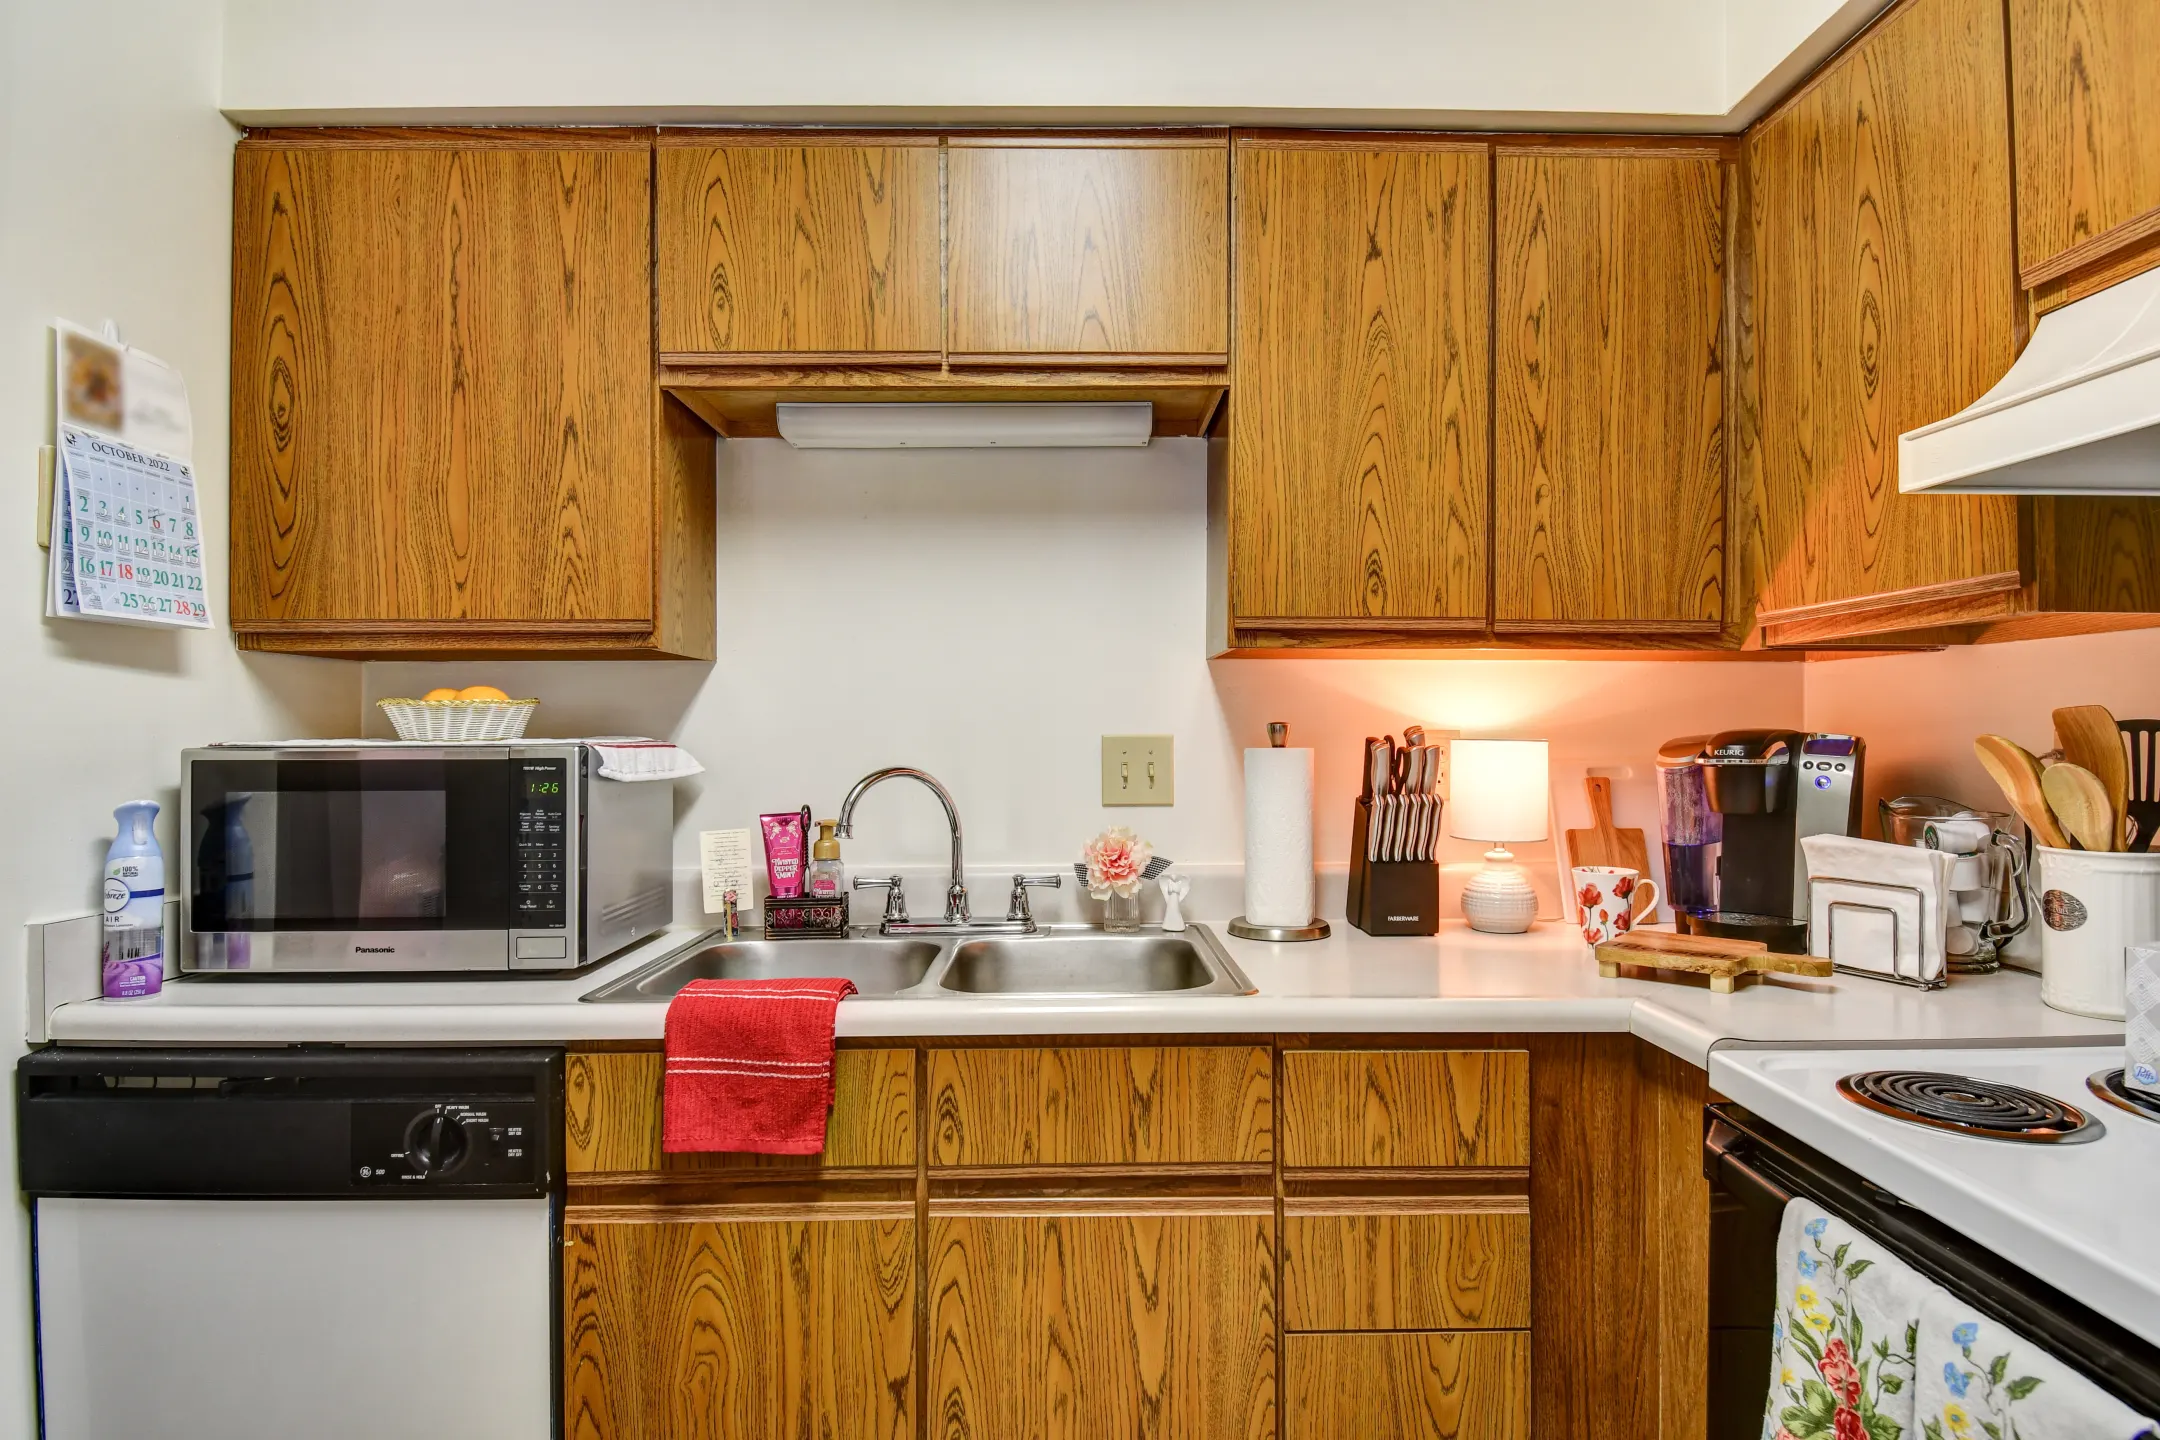 Kitchen - Hickory Knoll Apartments - Anderson, IN